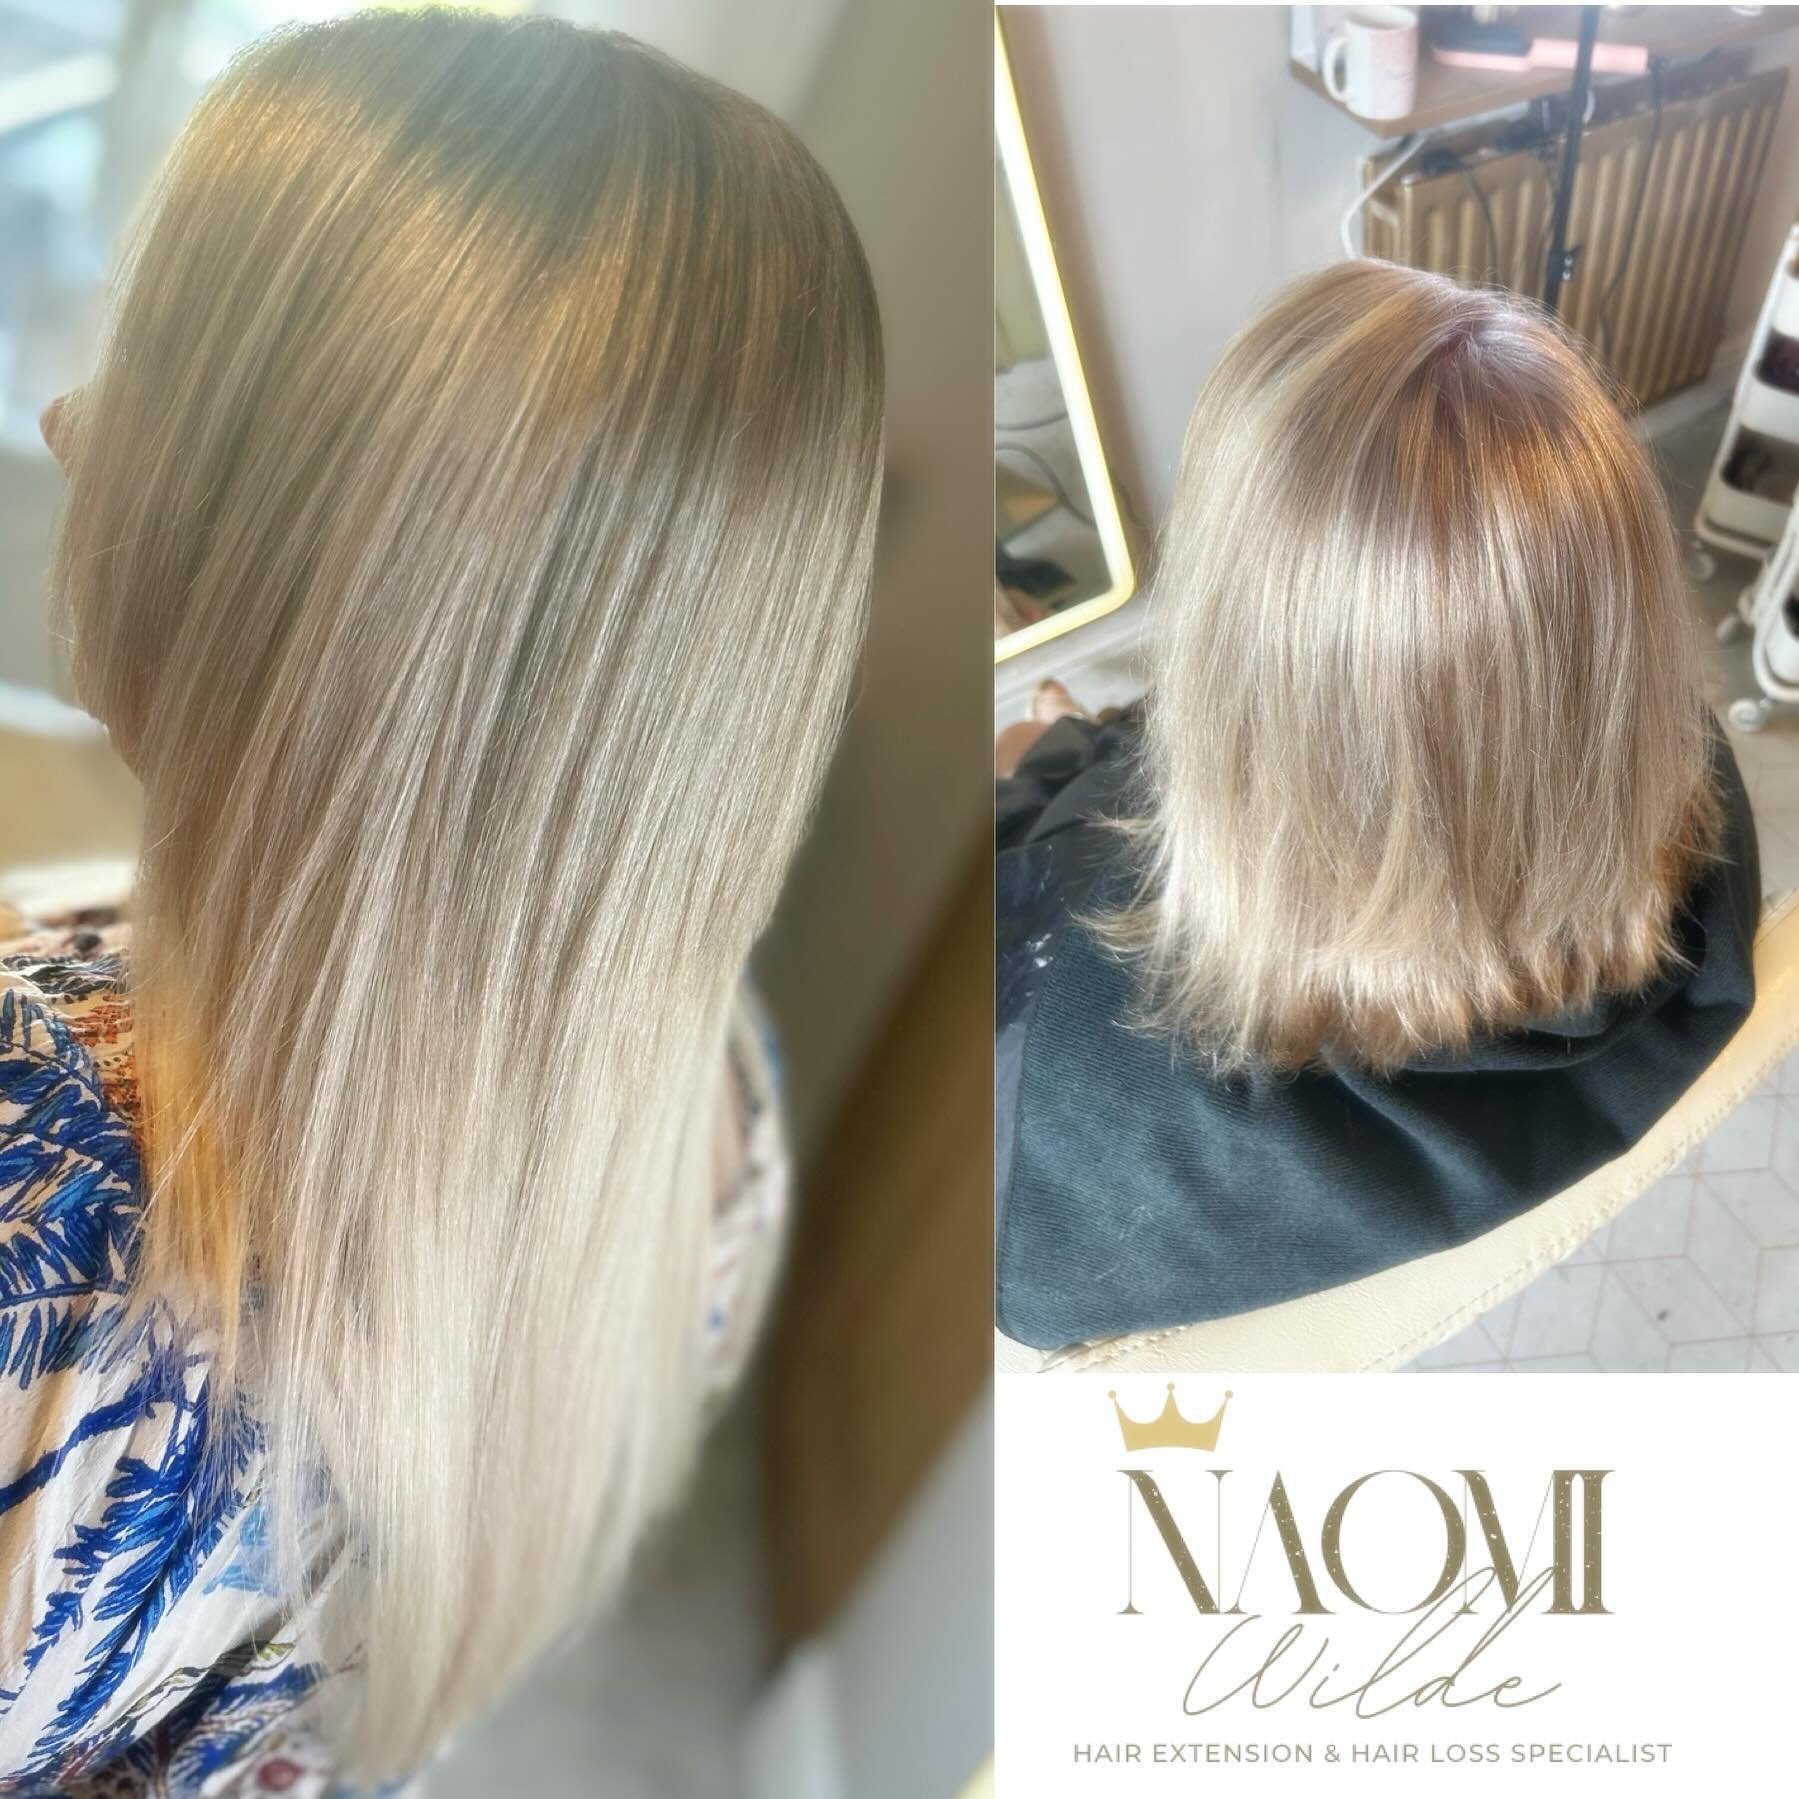 Memo - blend away the grey roots &amp; add length but remain natural looking 🙋🏼&zwj;♀️😍 and LOOK at that shine 👀

@swayhairextensions seamless weft in shade rooted Hollywood ash 

Highlights &amp; low lights to give a subtle blonde balayage effec